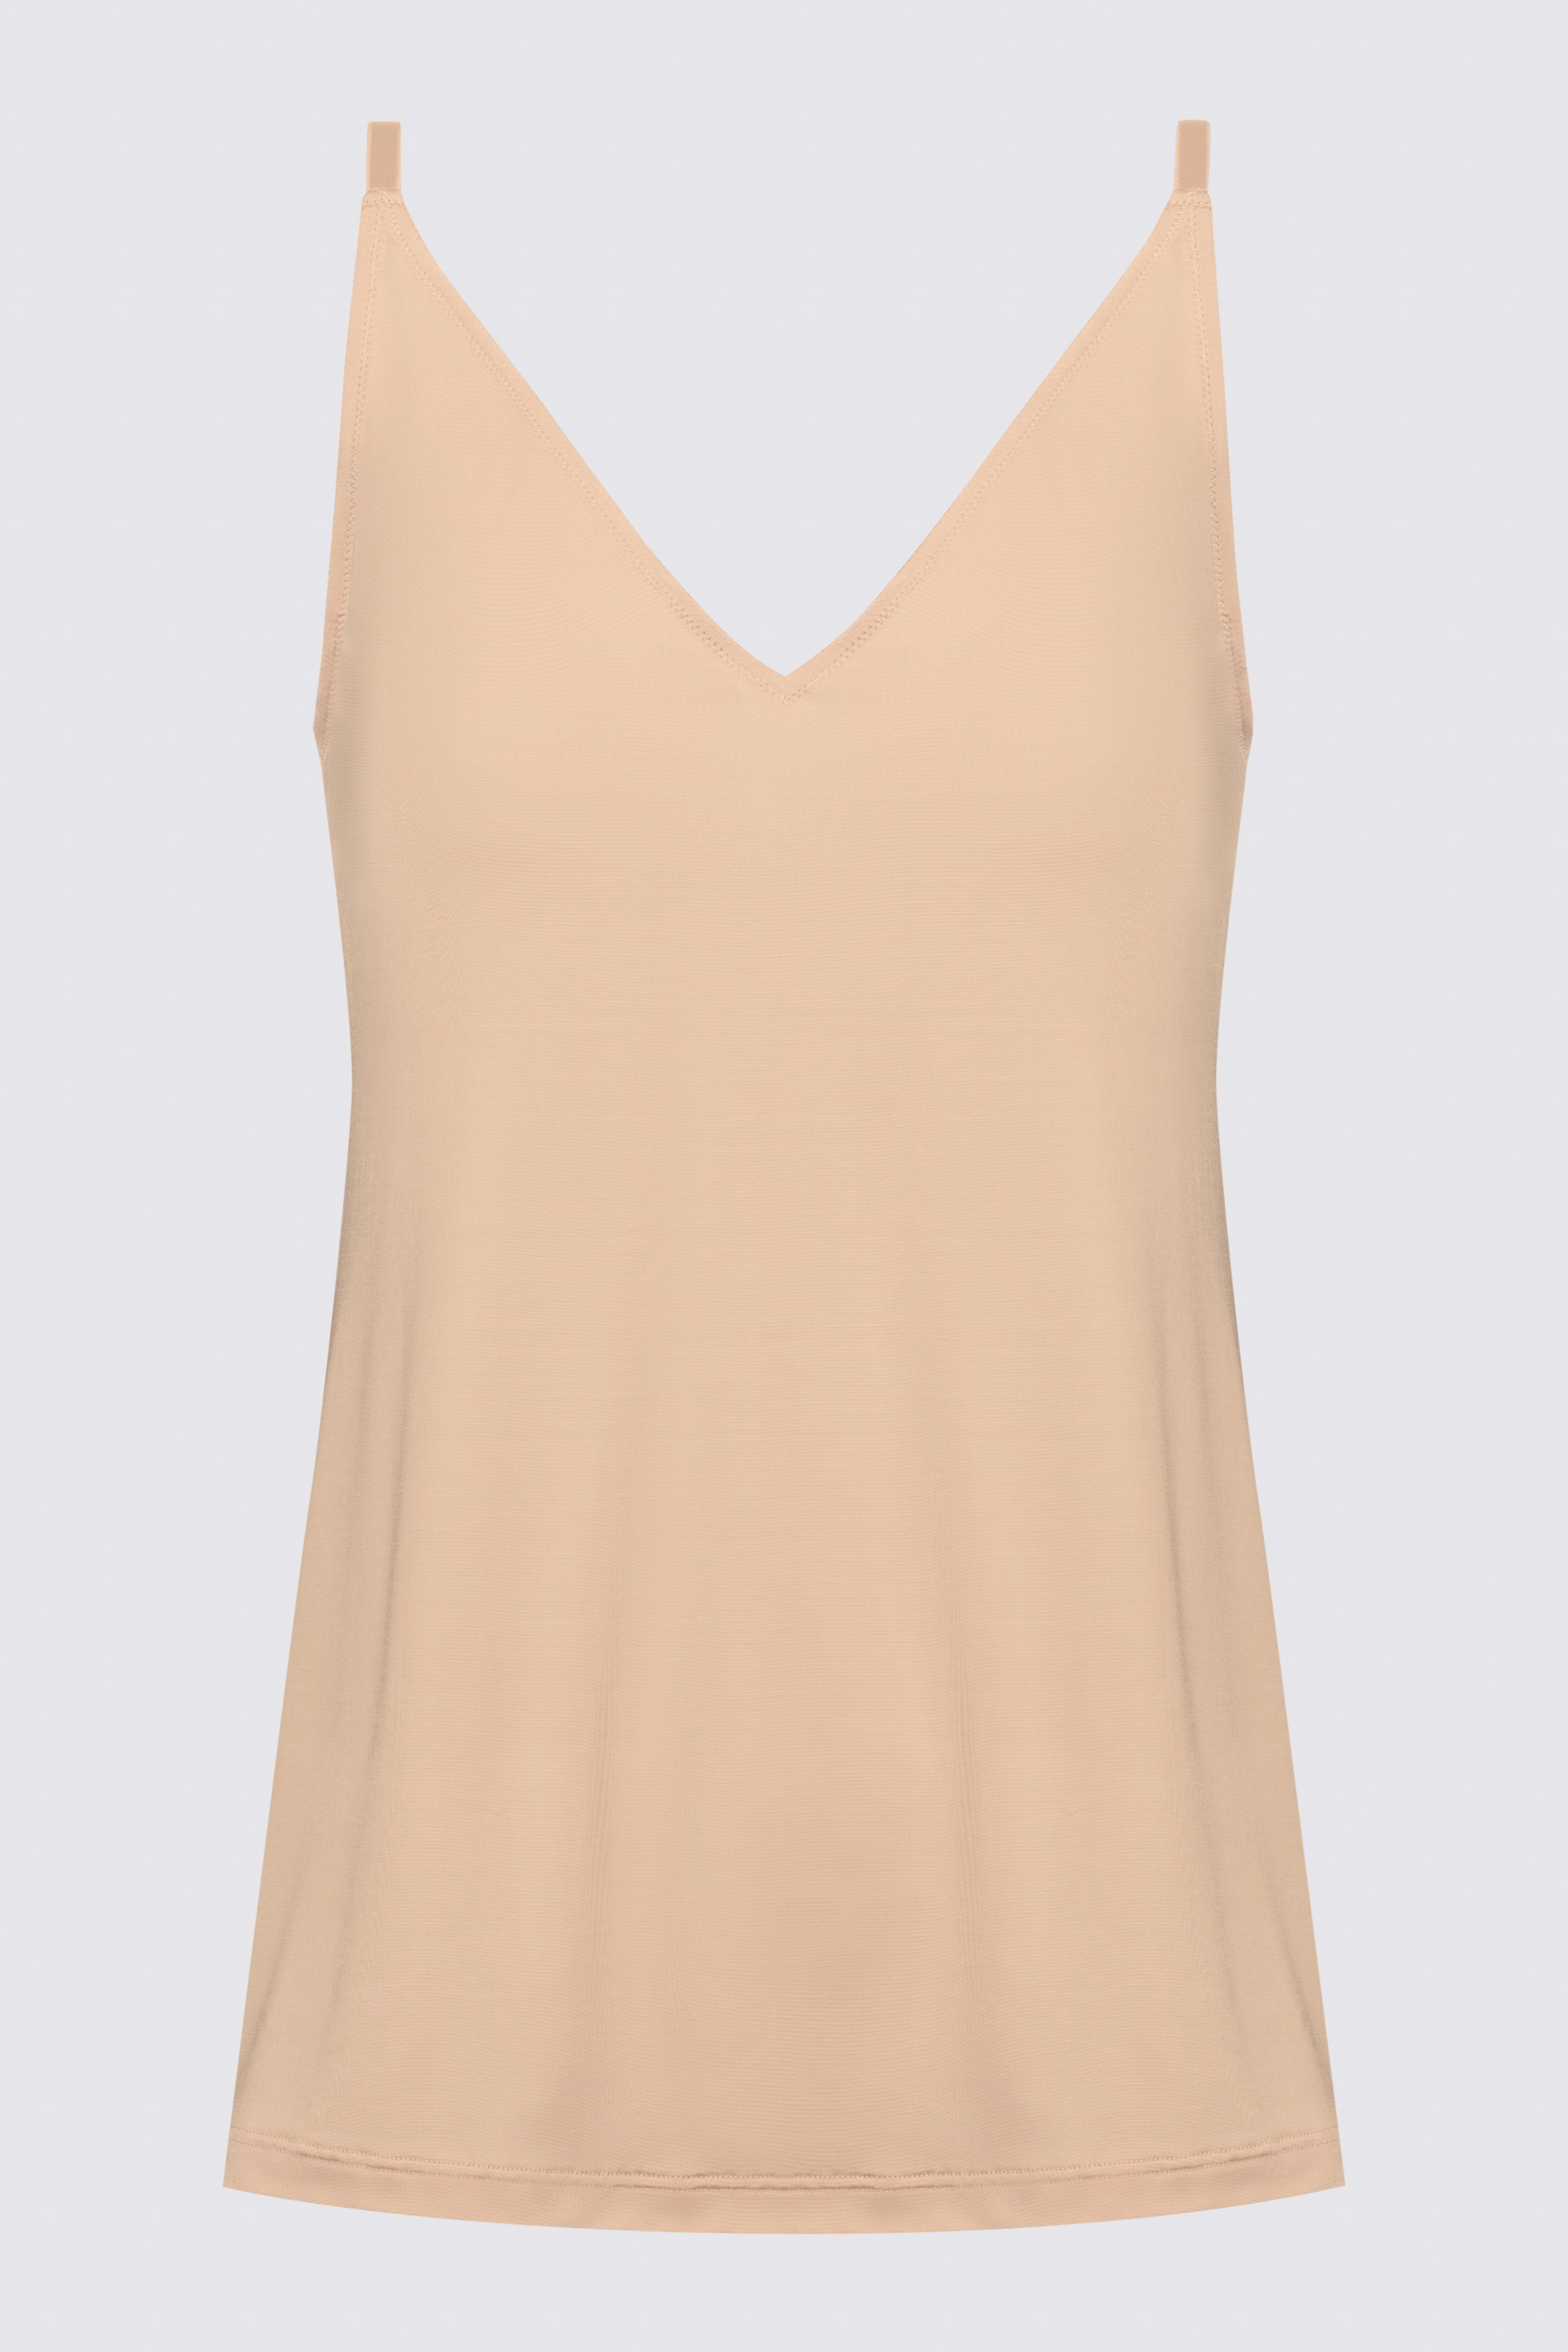 Camisole Serie Poetry Classy Uitknippen | mey®